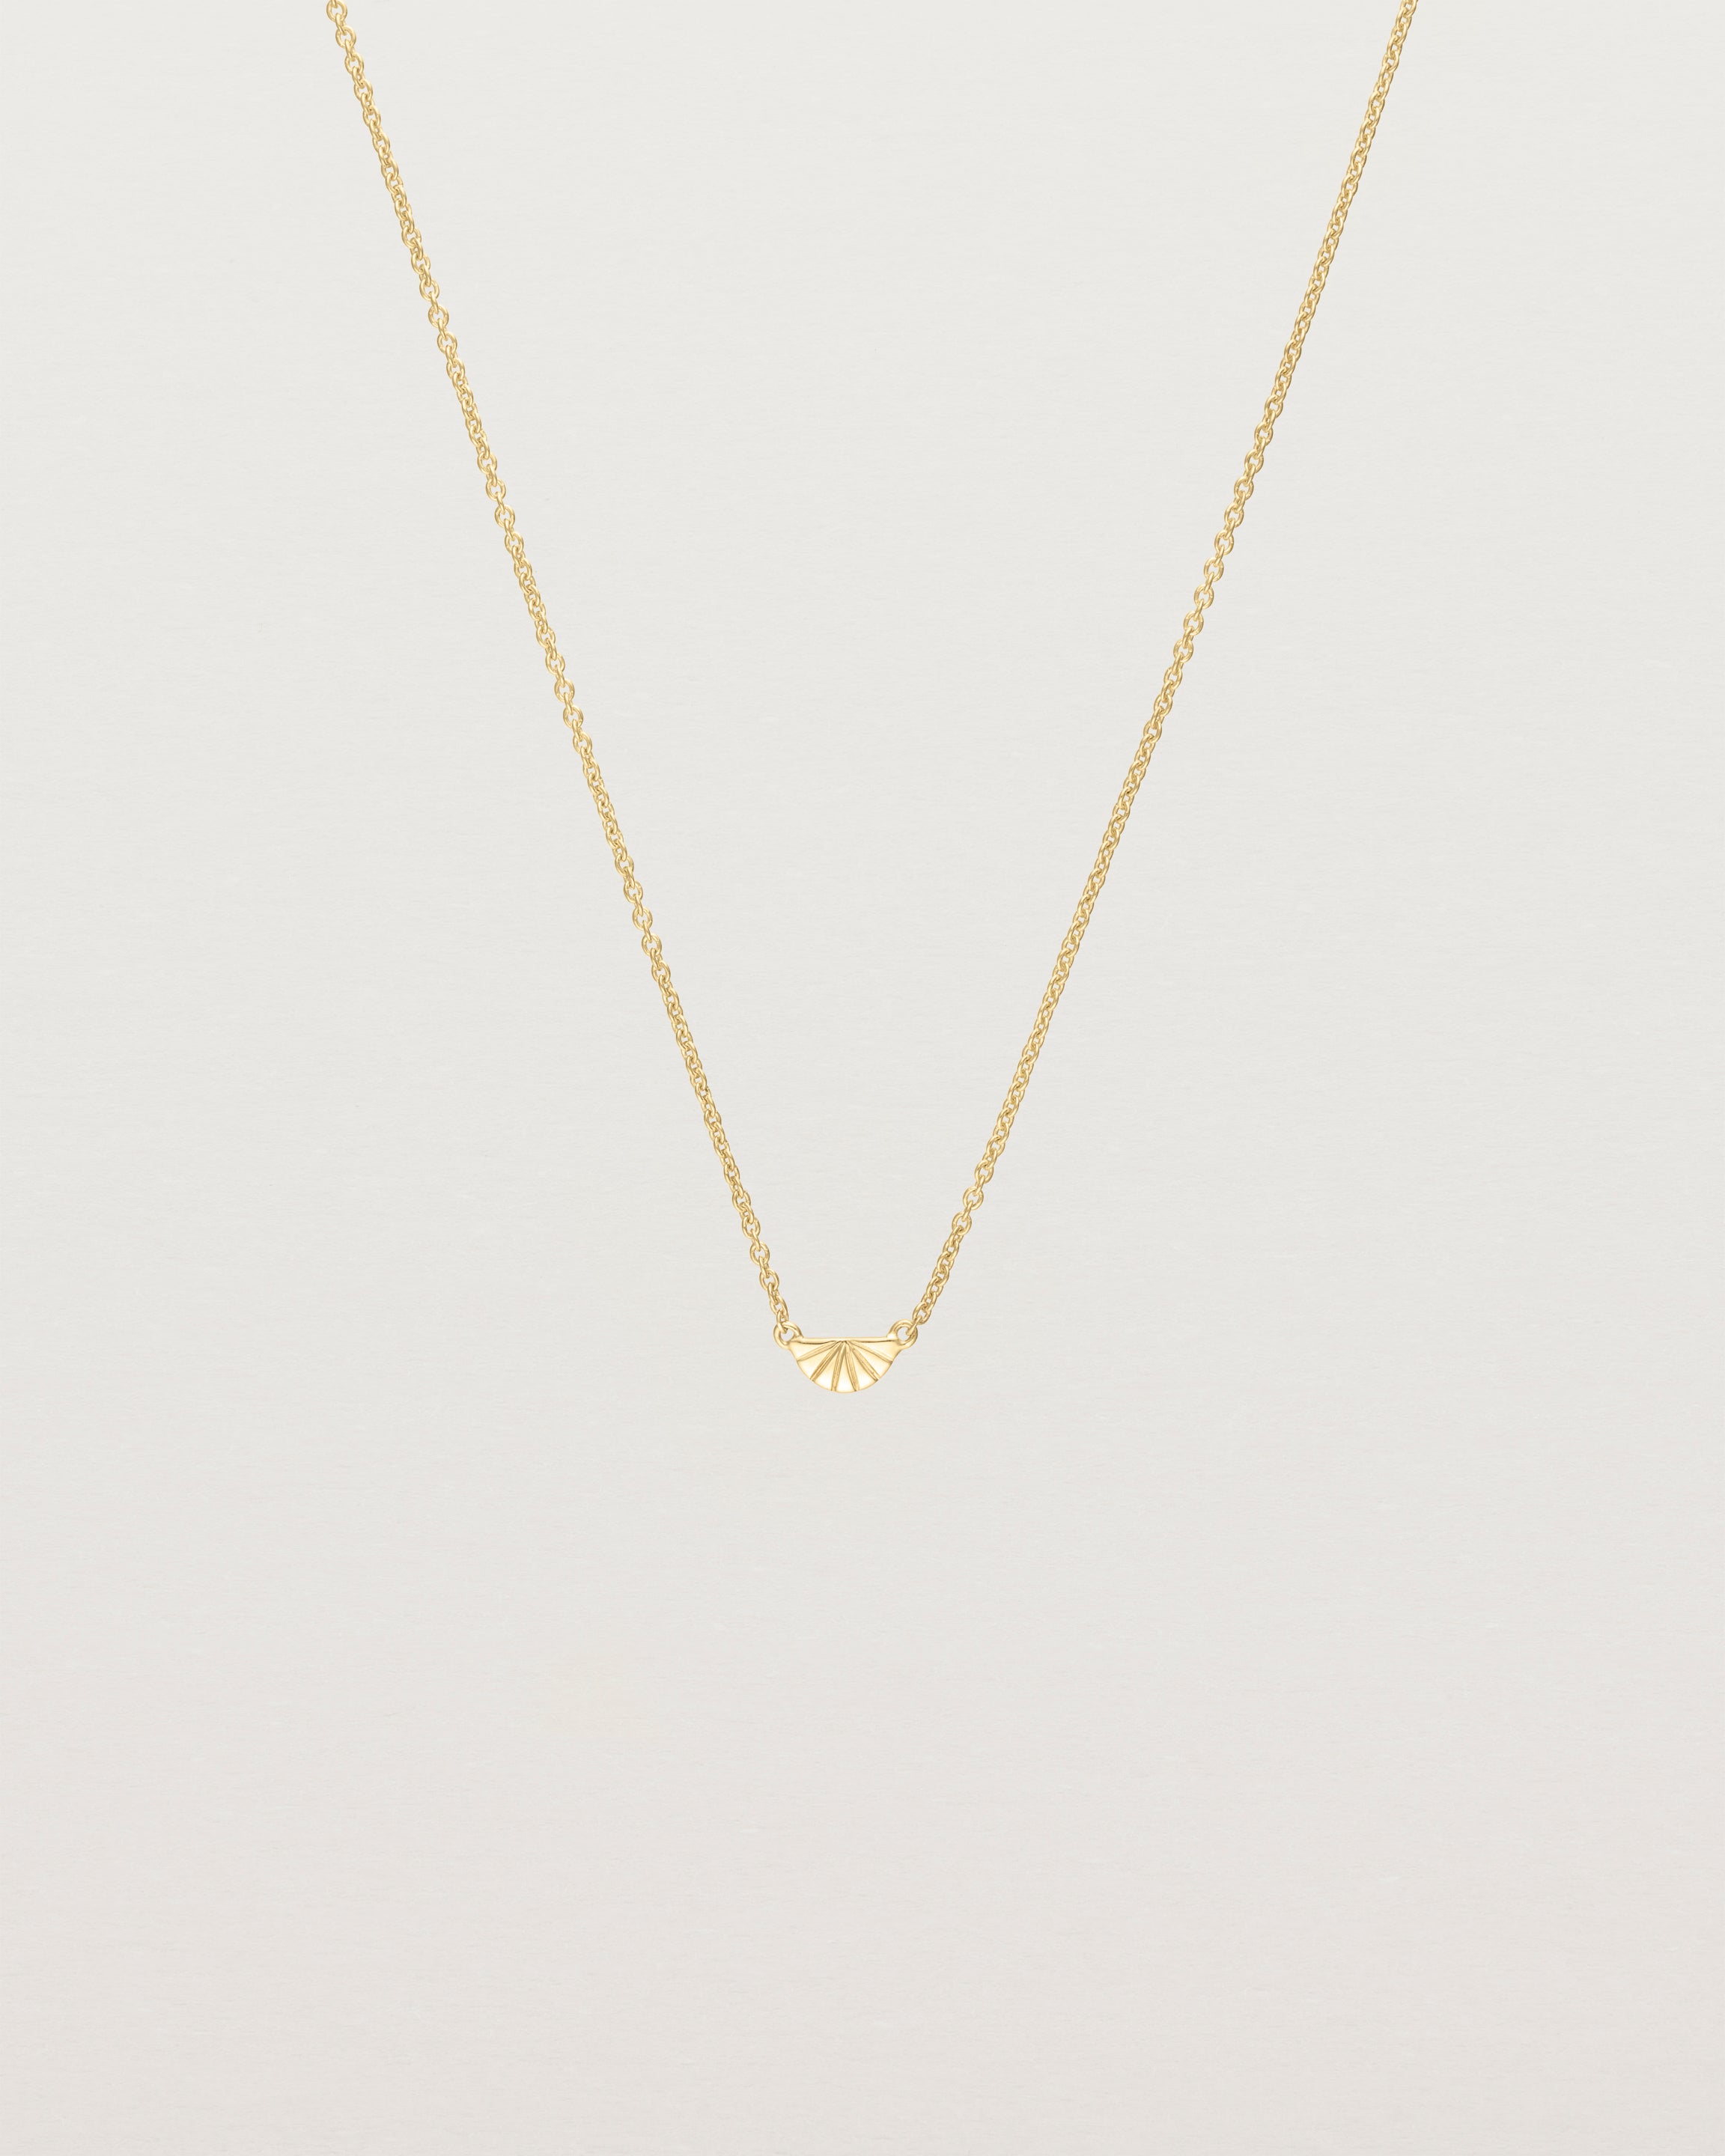 Front view of the Jia Necklace in Yellow Gold.